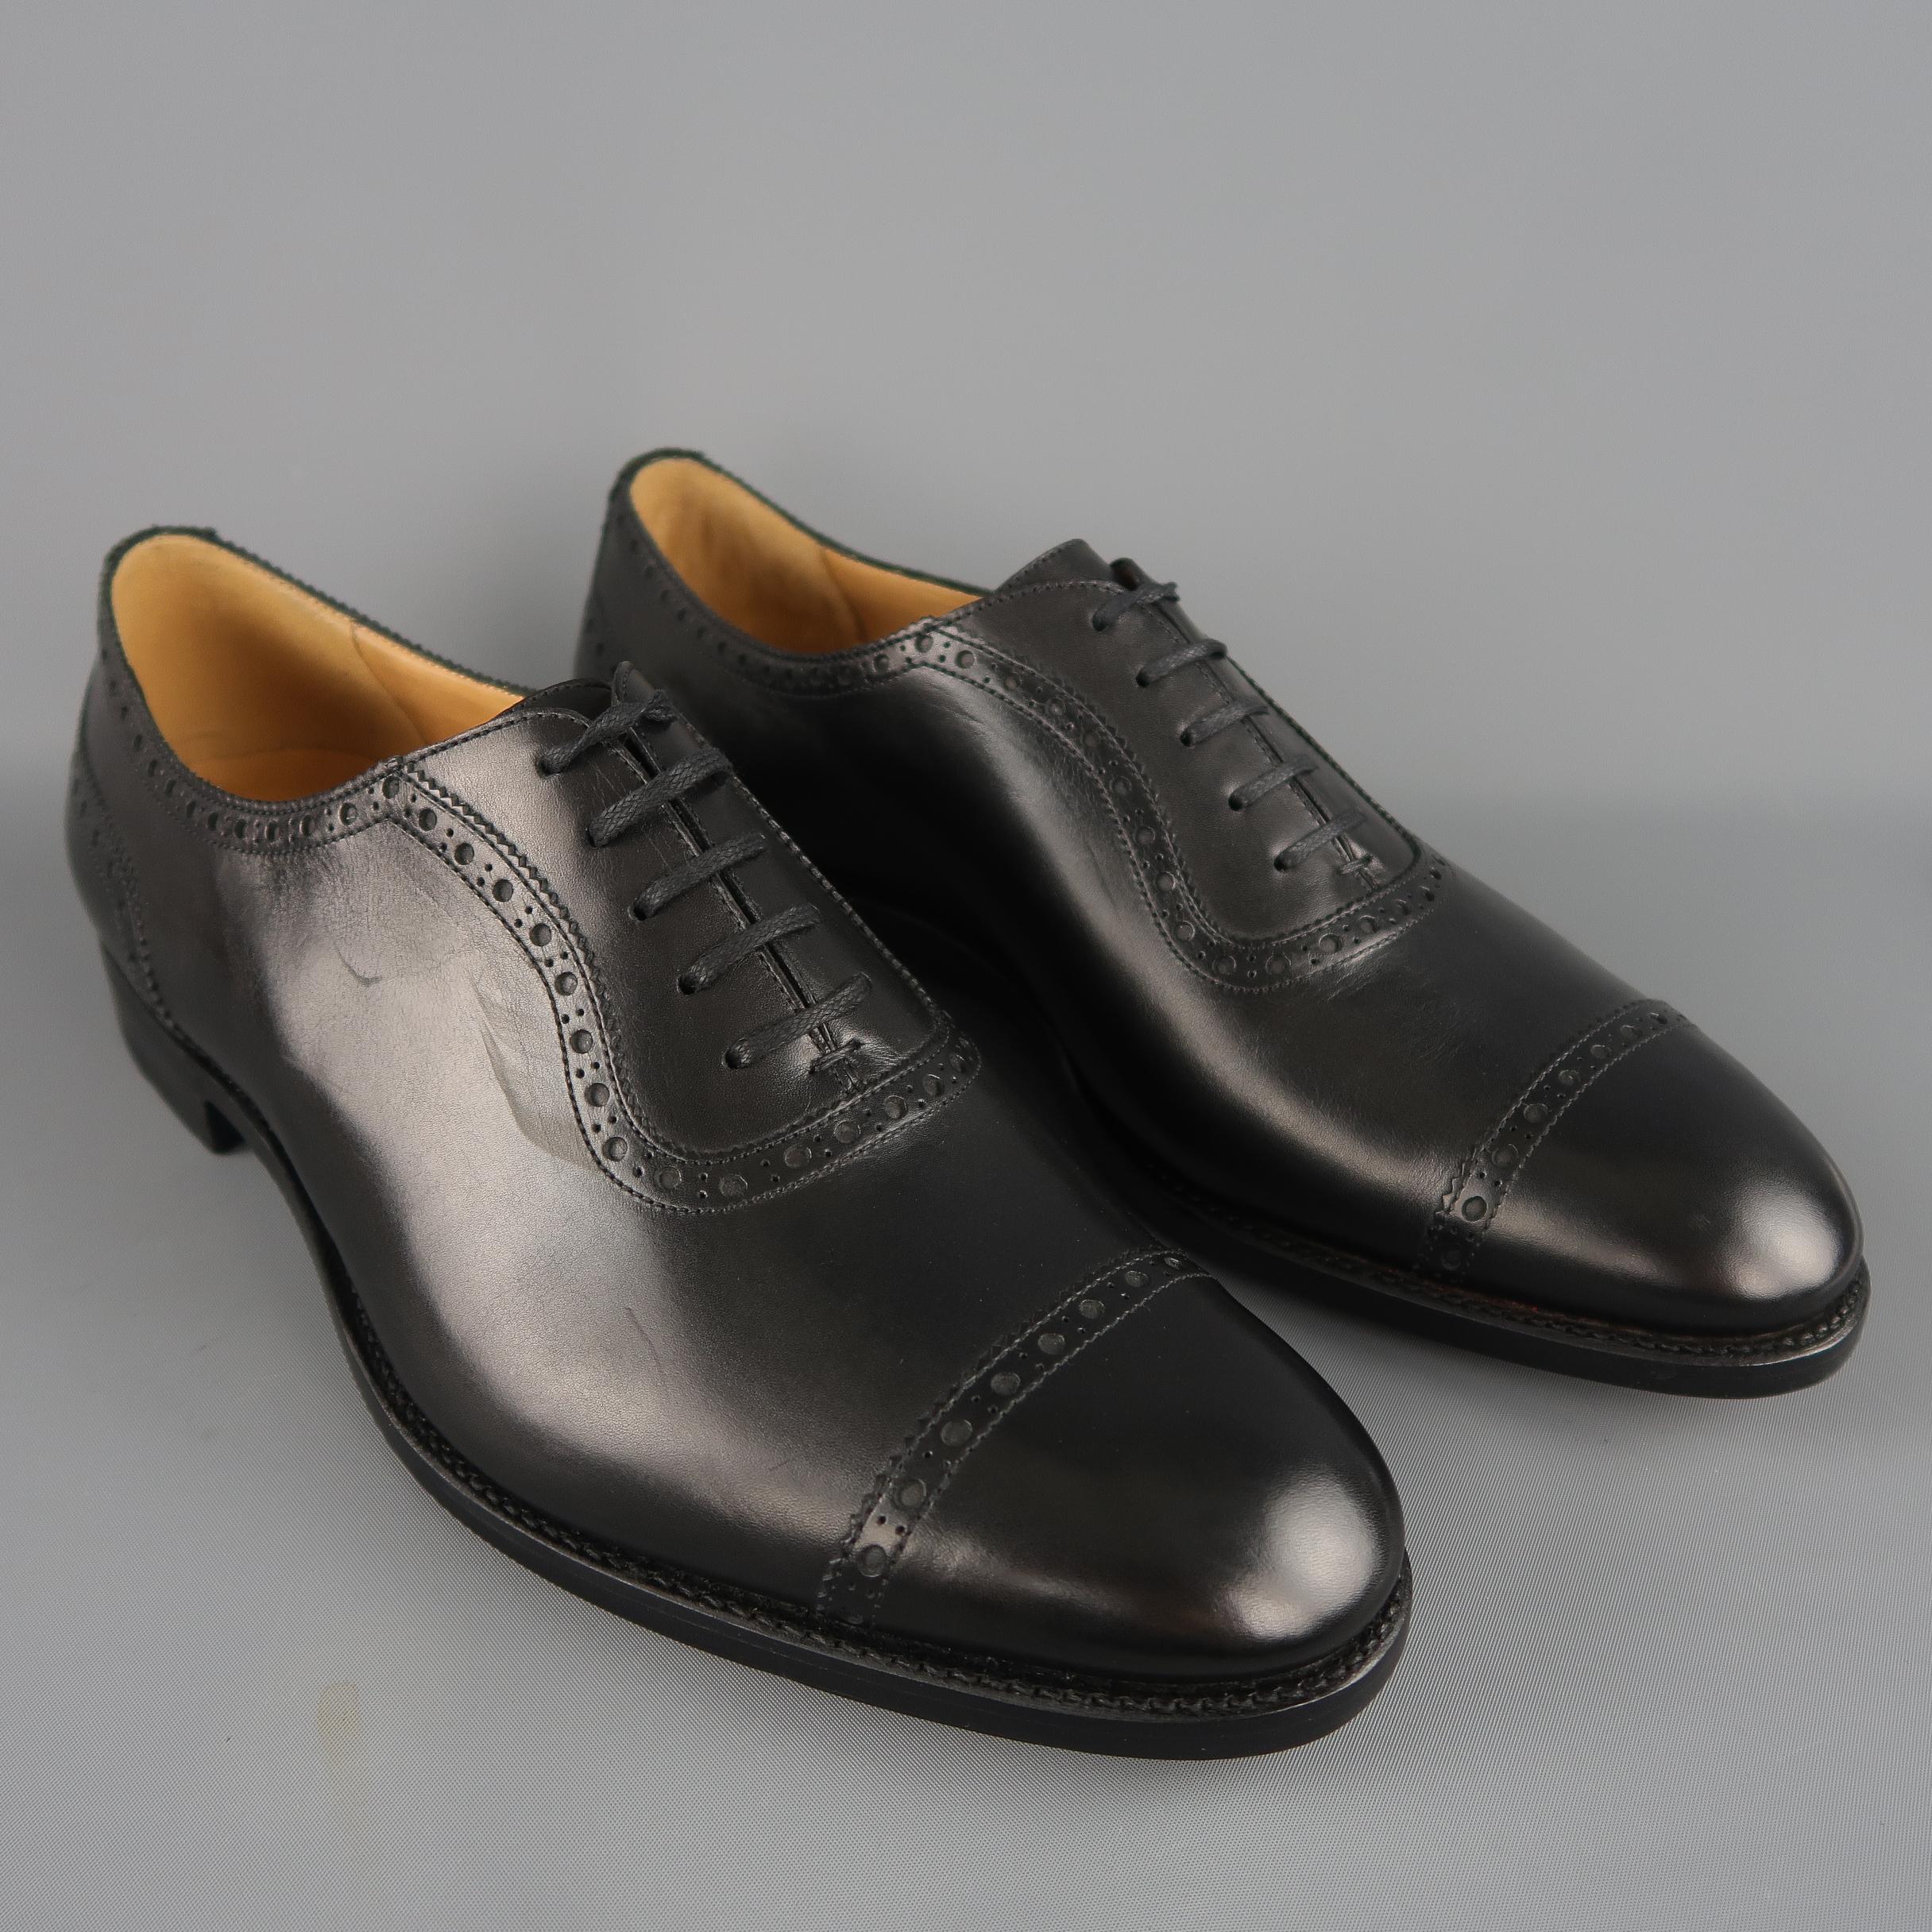 Barbanera dress shoes come in smooth leather with a cap toe and perforated brogue trim. Made in Italy.
 
New with Box.
Marked: 12